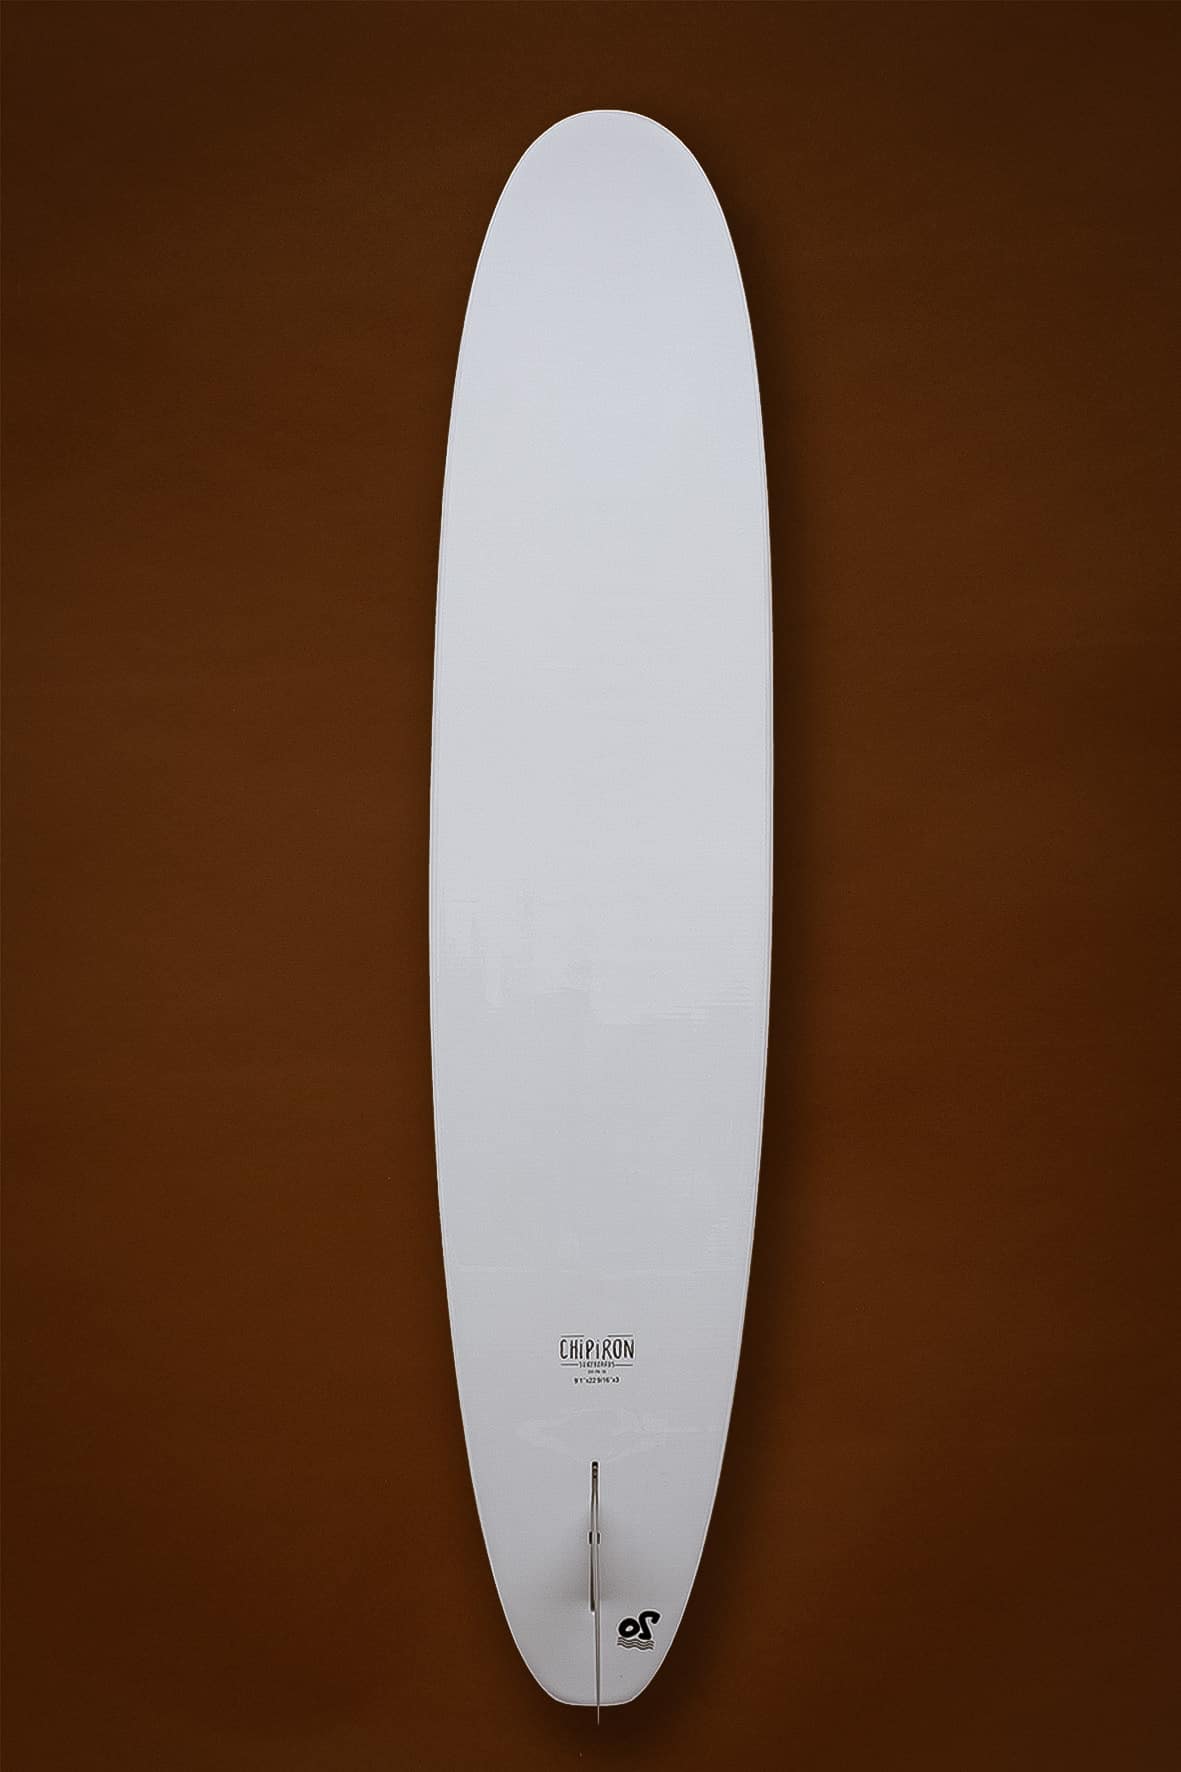 longboard-9-mousse-chipiron-surfboards-outline-dos